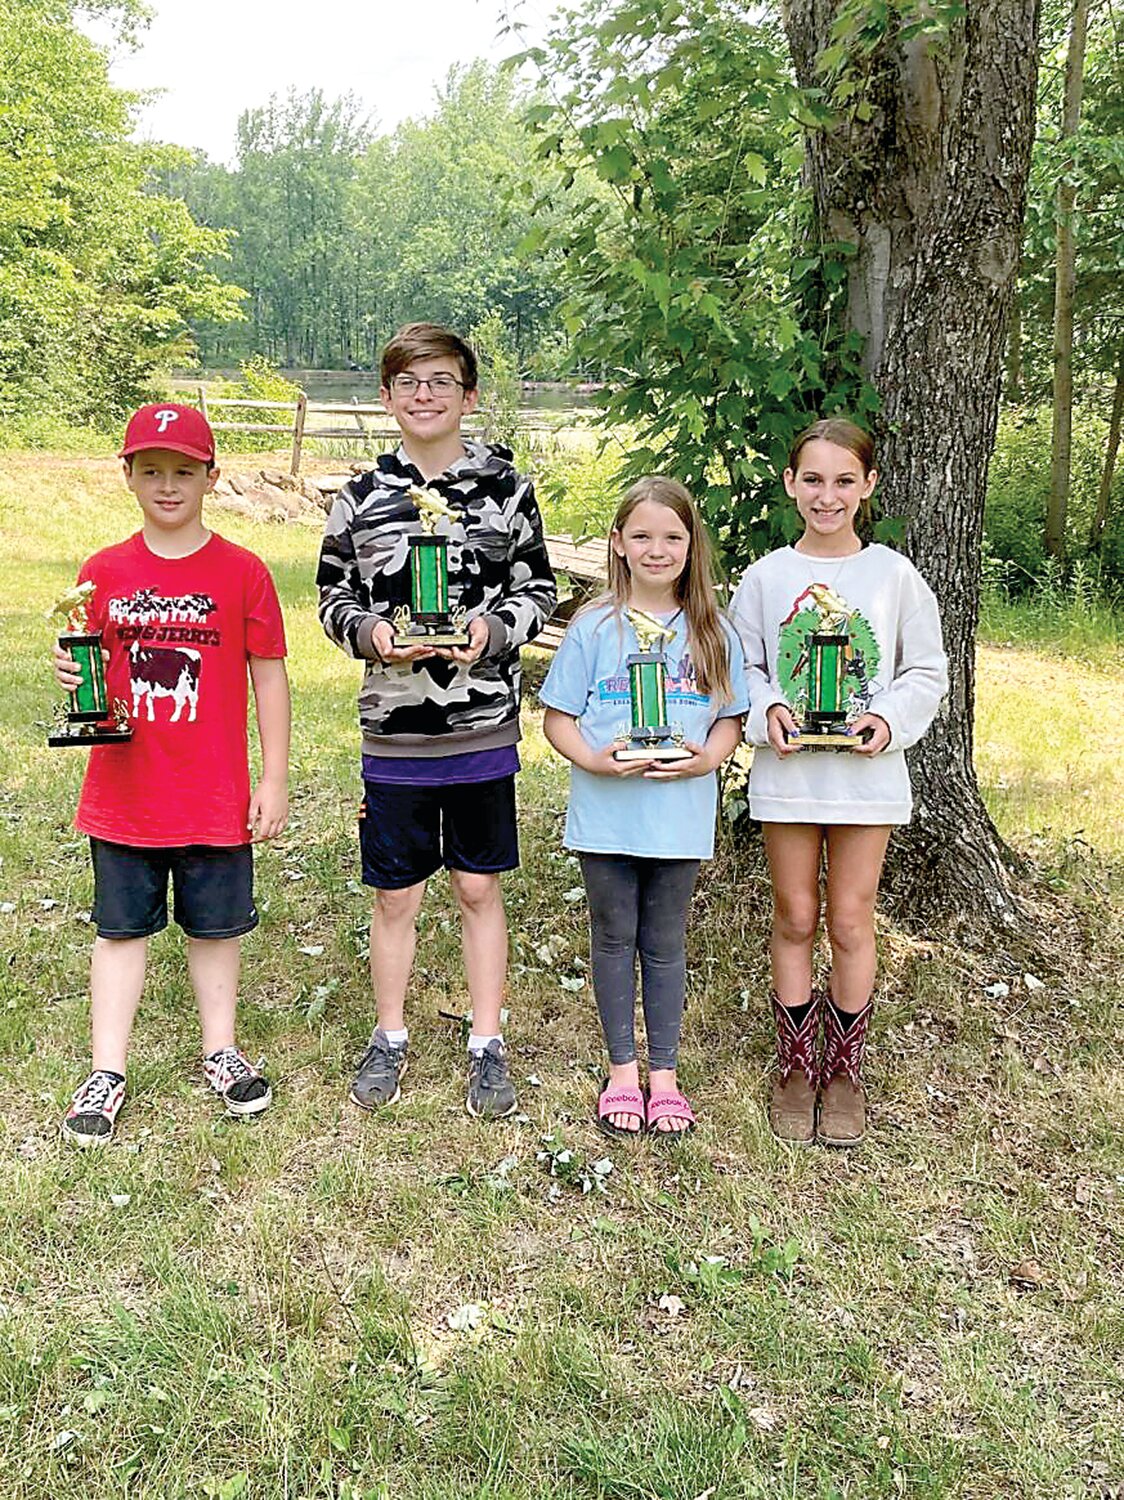 Winners of the Friends of Nockamixon State Park Kid's Fishing Tournament, were, from left, Ben Ewer, Jake Vincent, Amelia Doremus and Kaylee Frey.